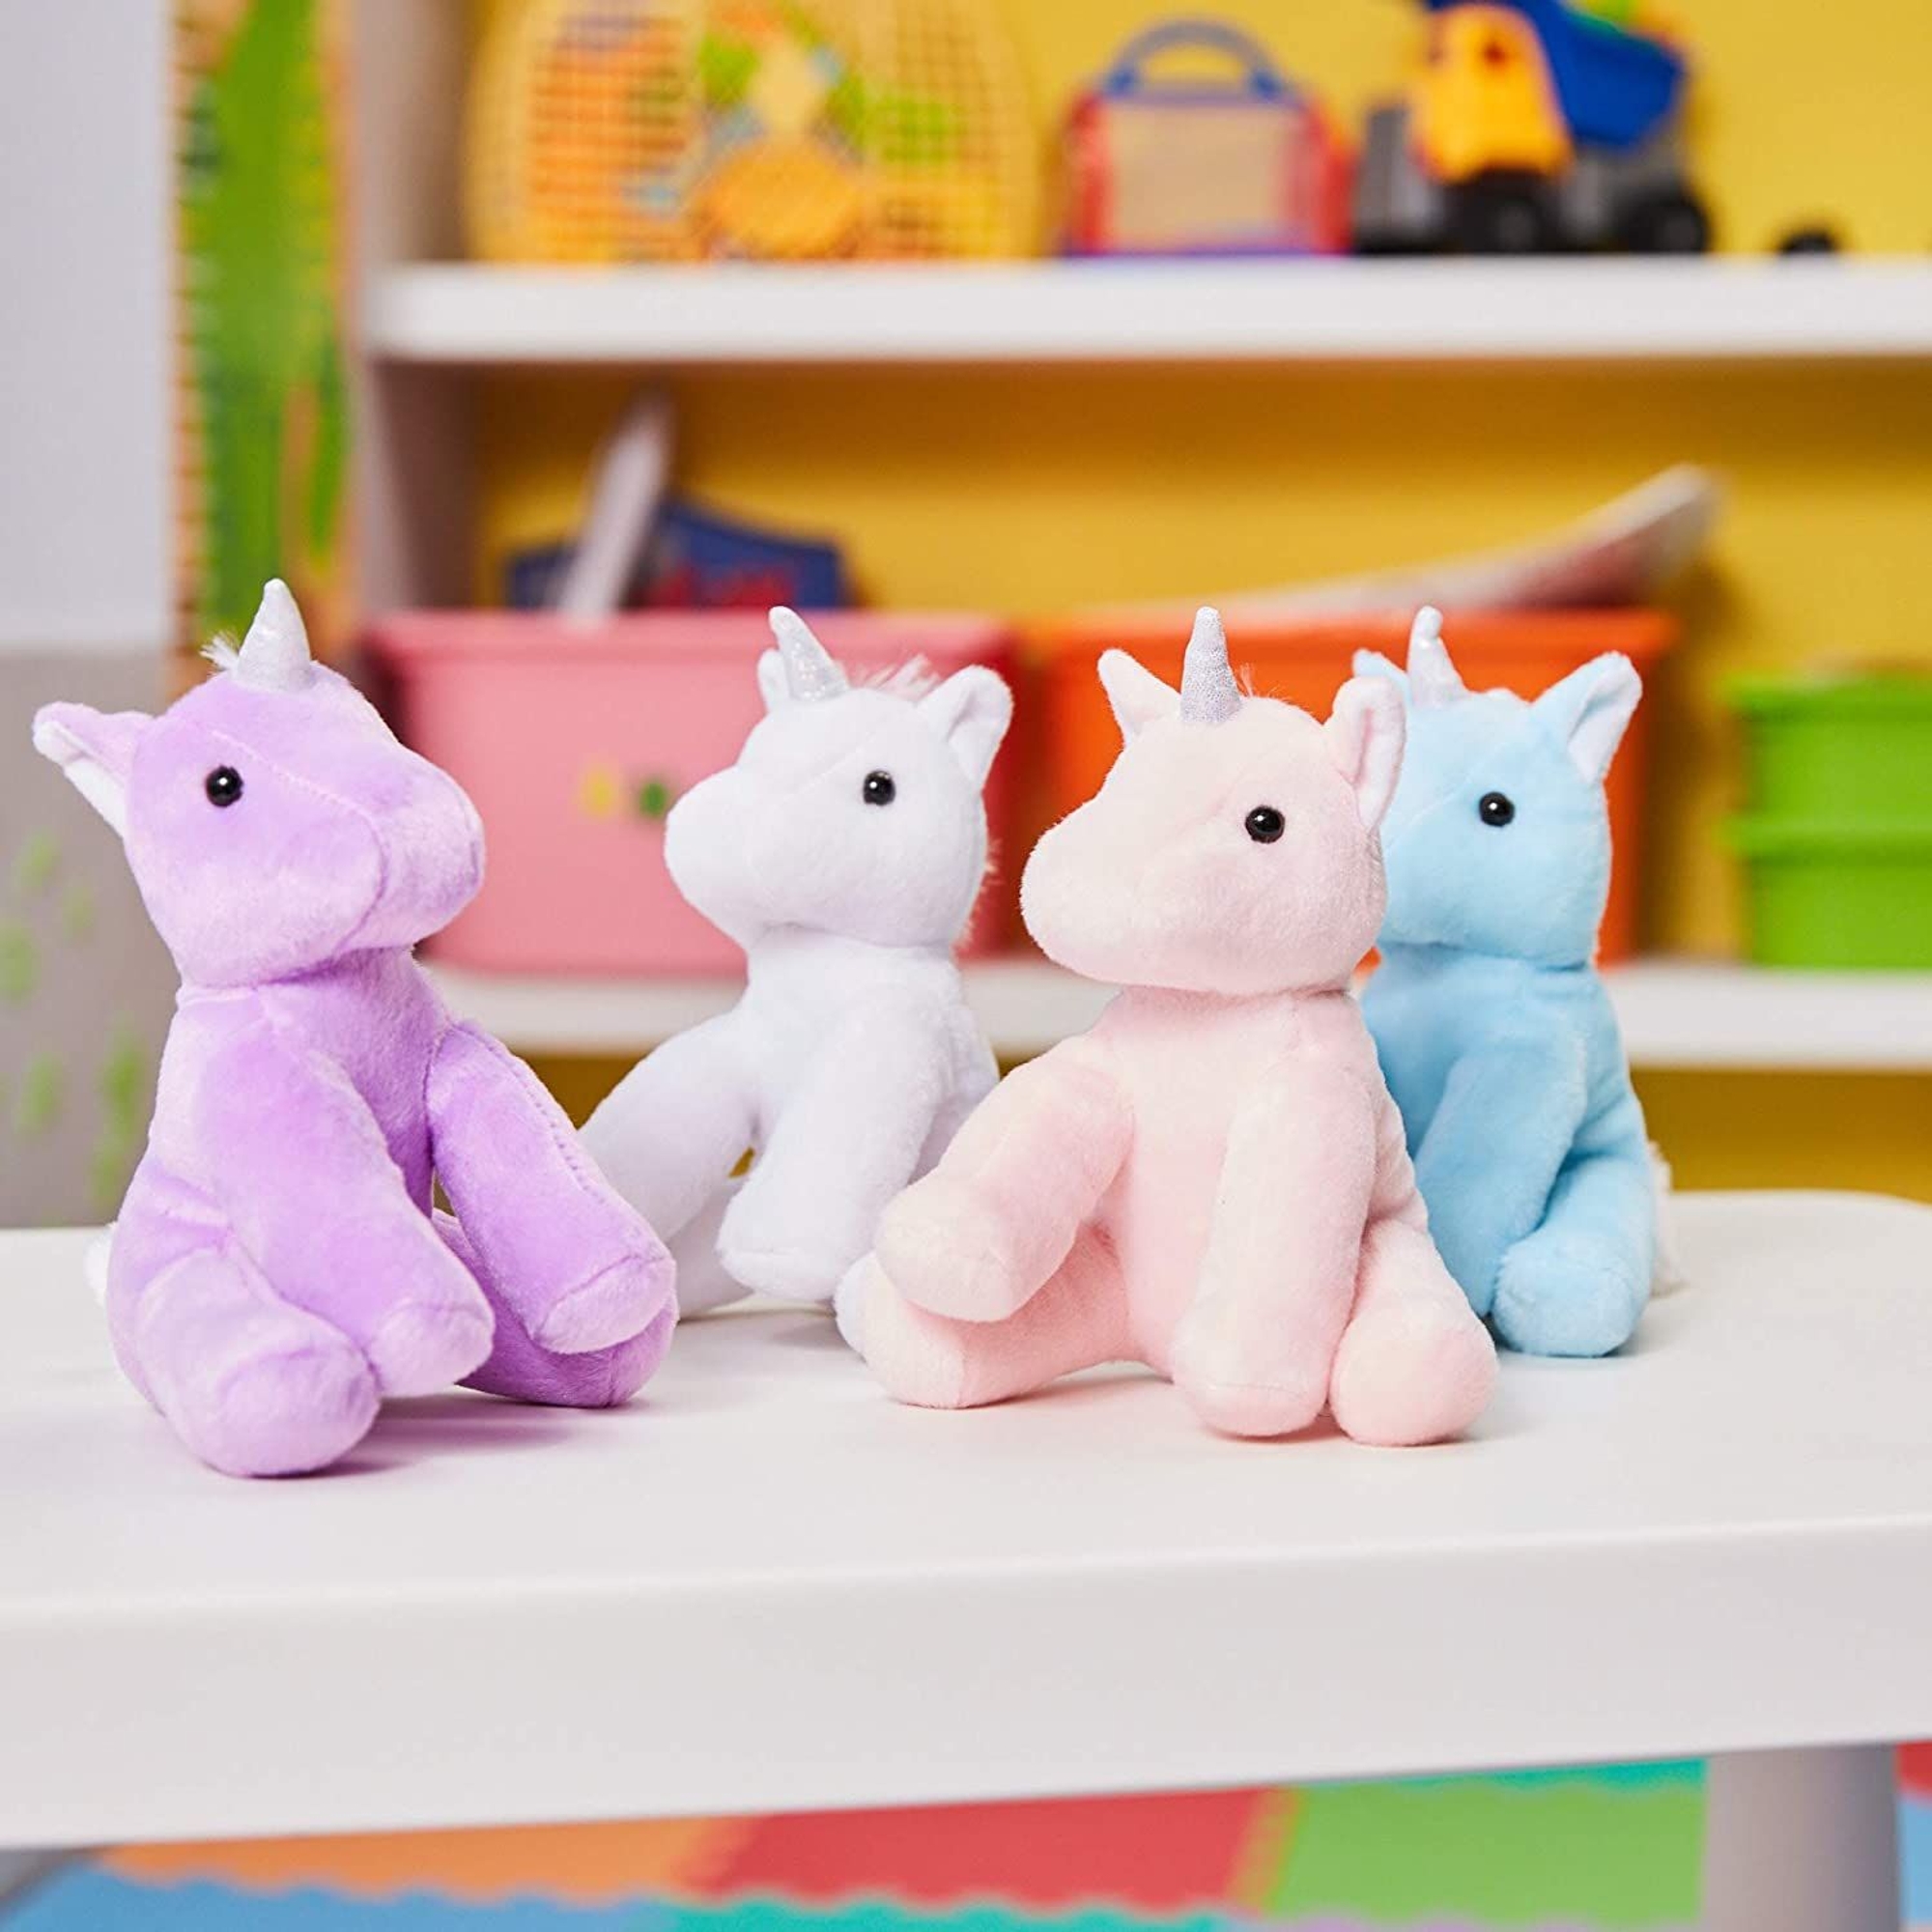 4 Pack Small Unicorn Plush for Girls, 7-inch Stuffed Animal Toys for Kids Birthday Gifts, Pastel Party Favors (4 Colors) - image 3 of 10